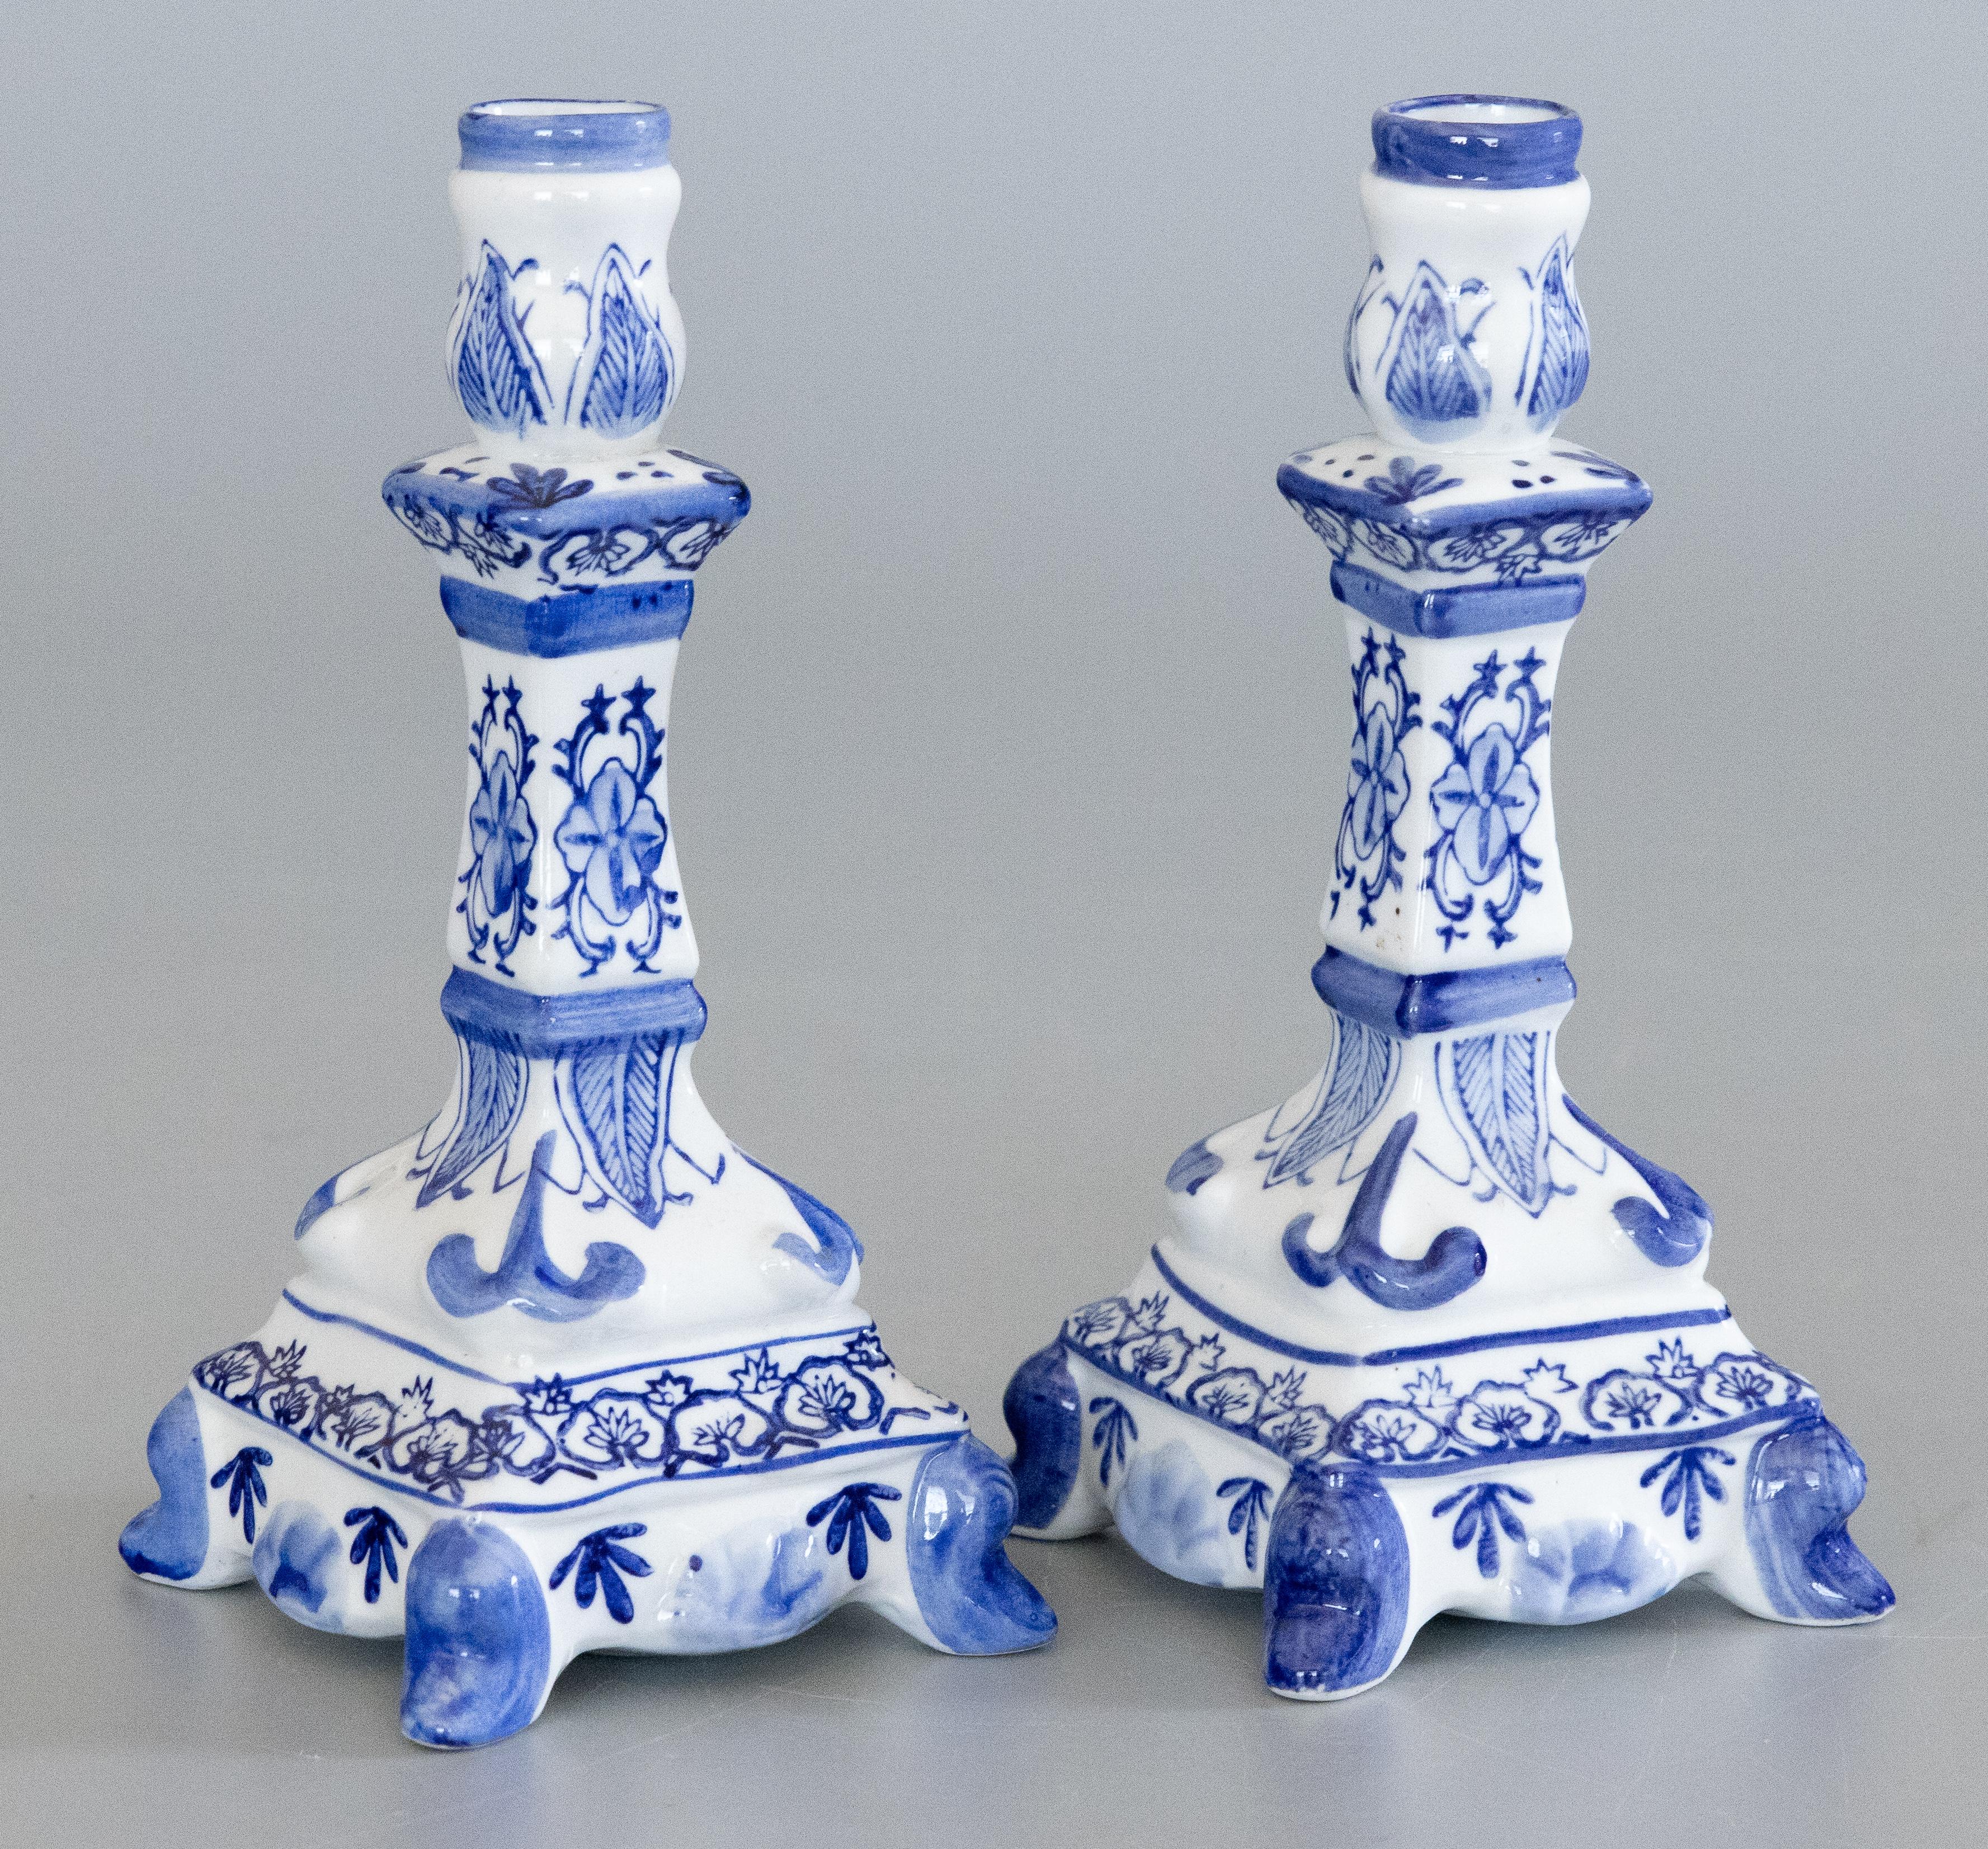 A lovely pair of antique early 20th Century Dutch Delft candlesticks, unmarked. These fine candlesticks are decorated with a hand painted beautiful floral design in the traditional Delft colors of cobalt blue and white. 